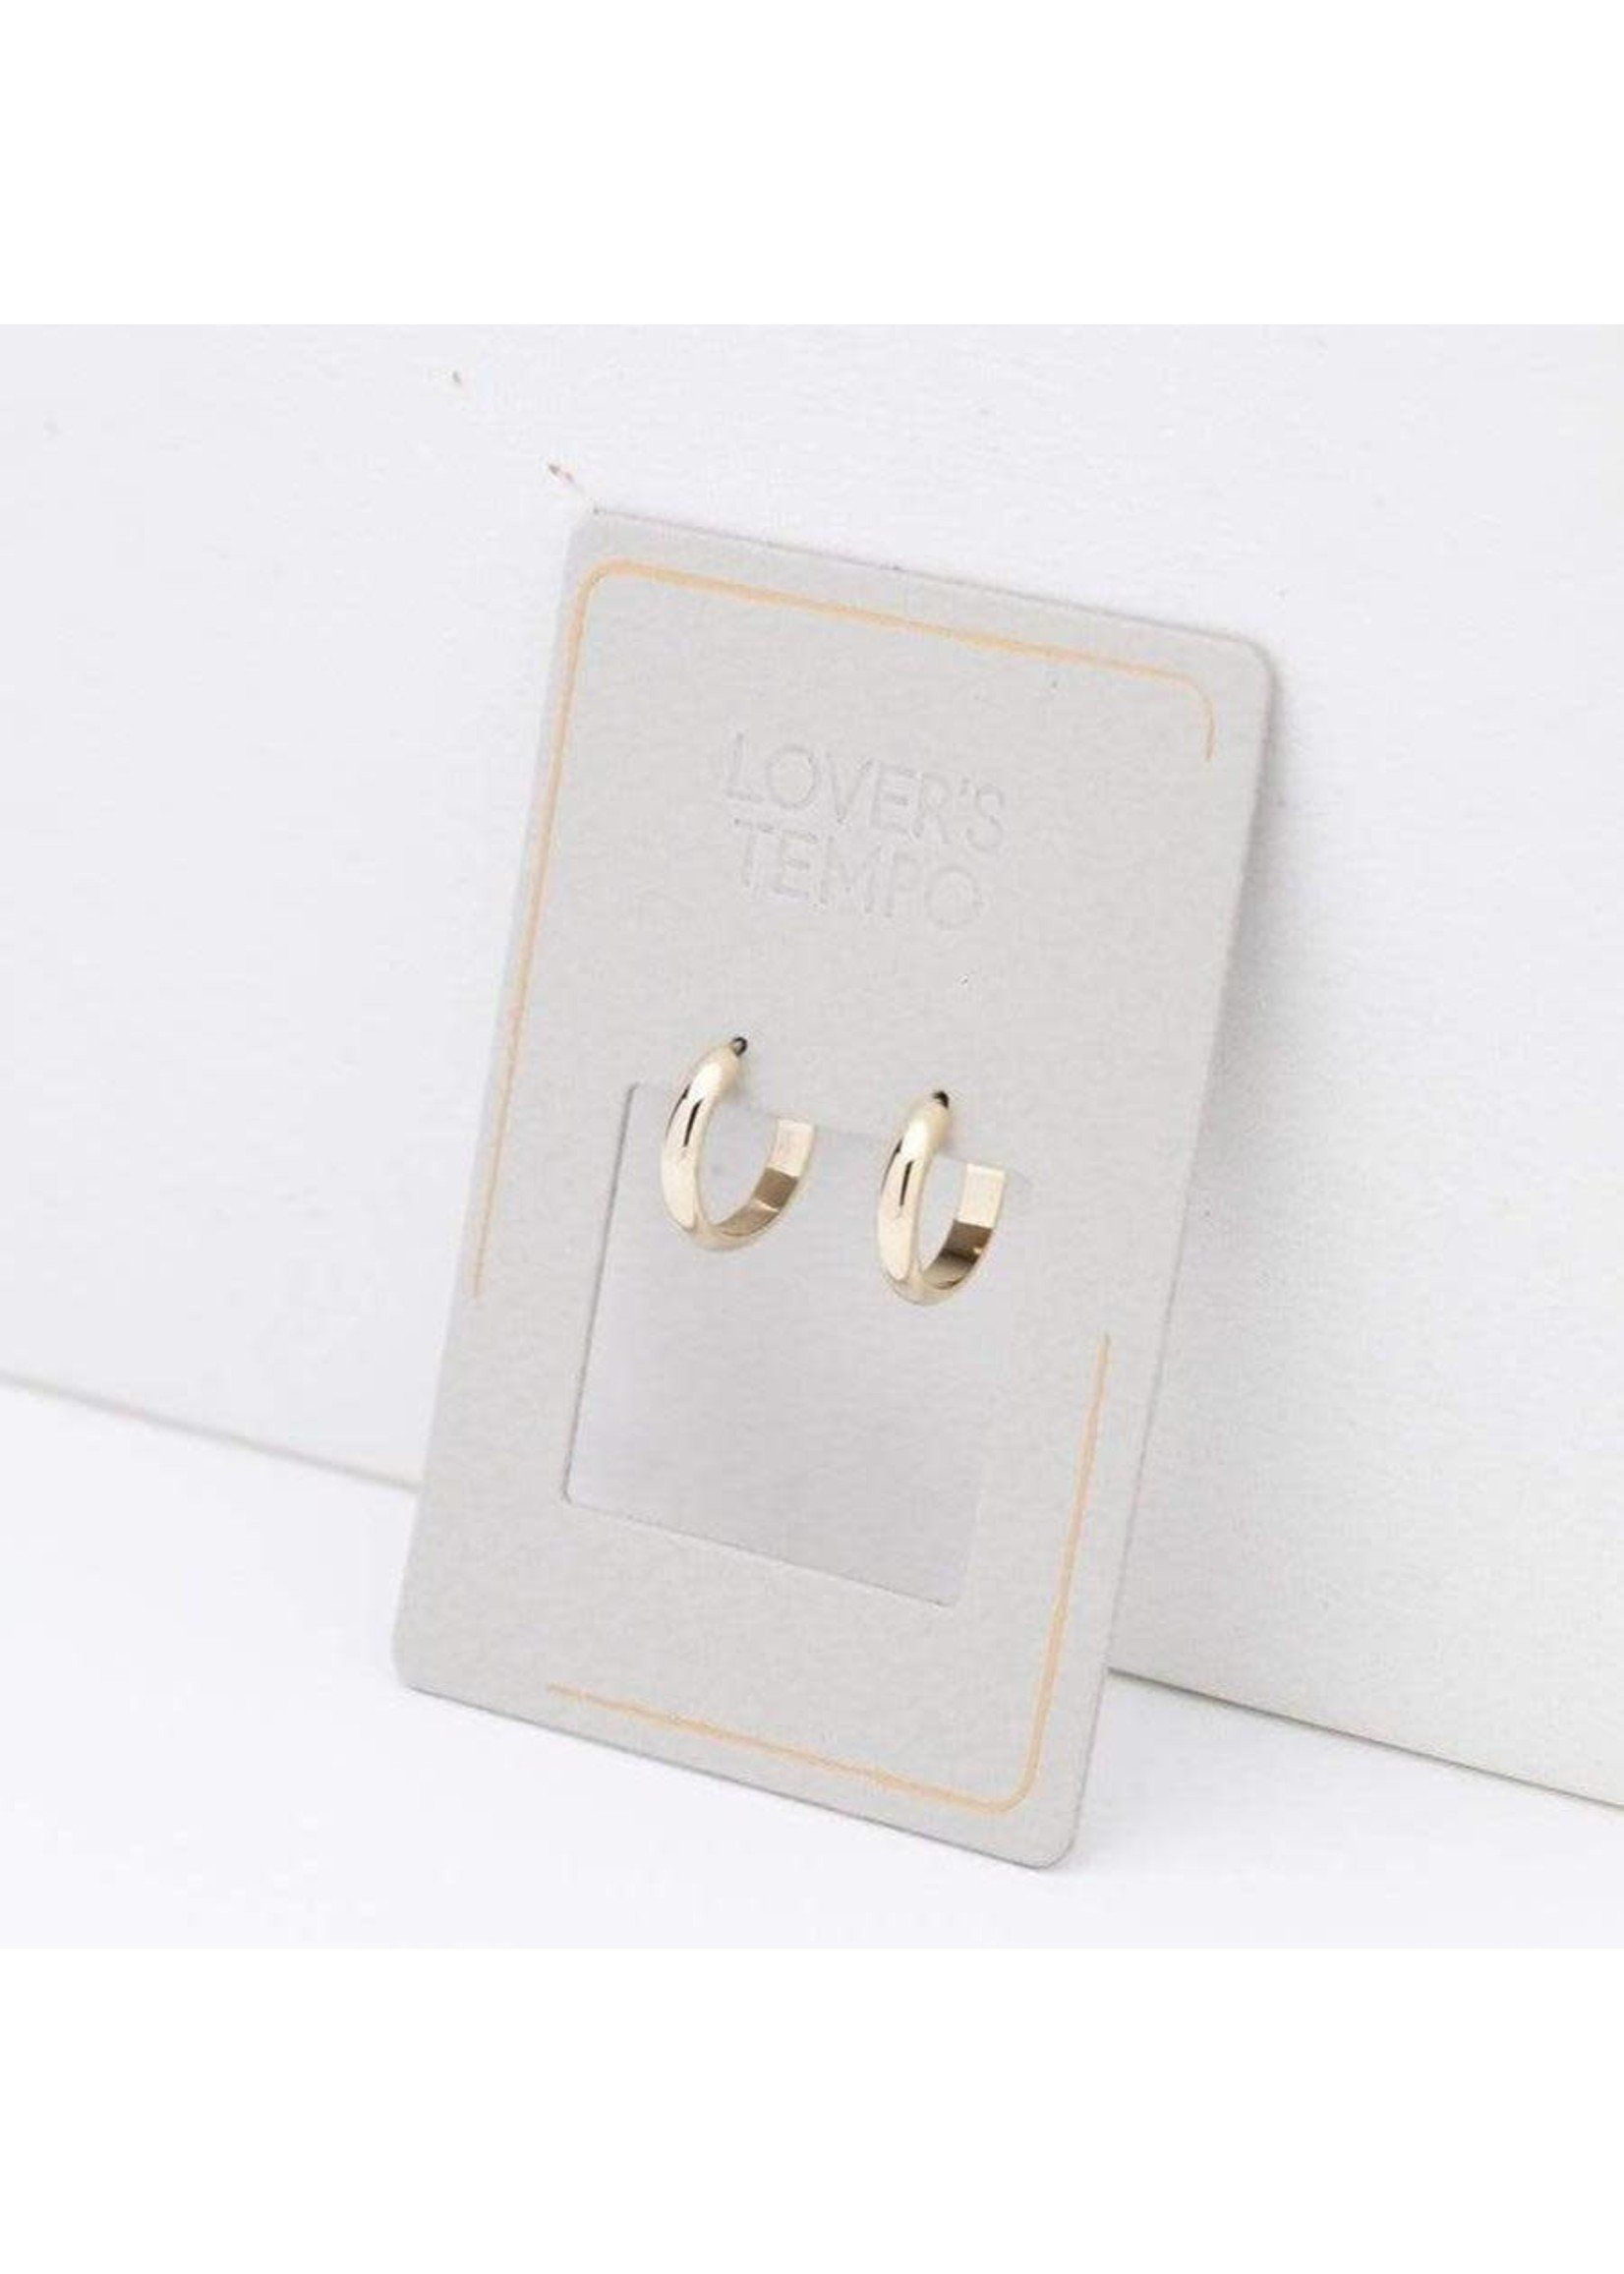 LOVER'S TEMPO LOVER'S TEMPO SILVIA HOOP EARRING 12mm- GOLD